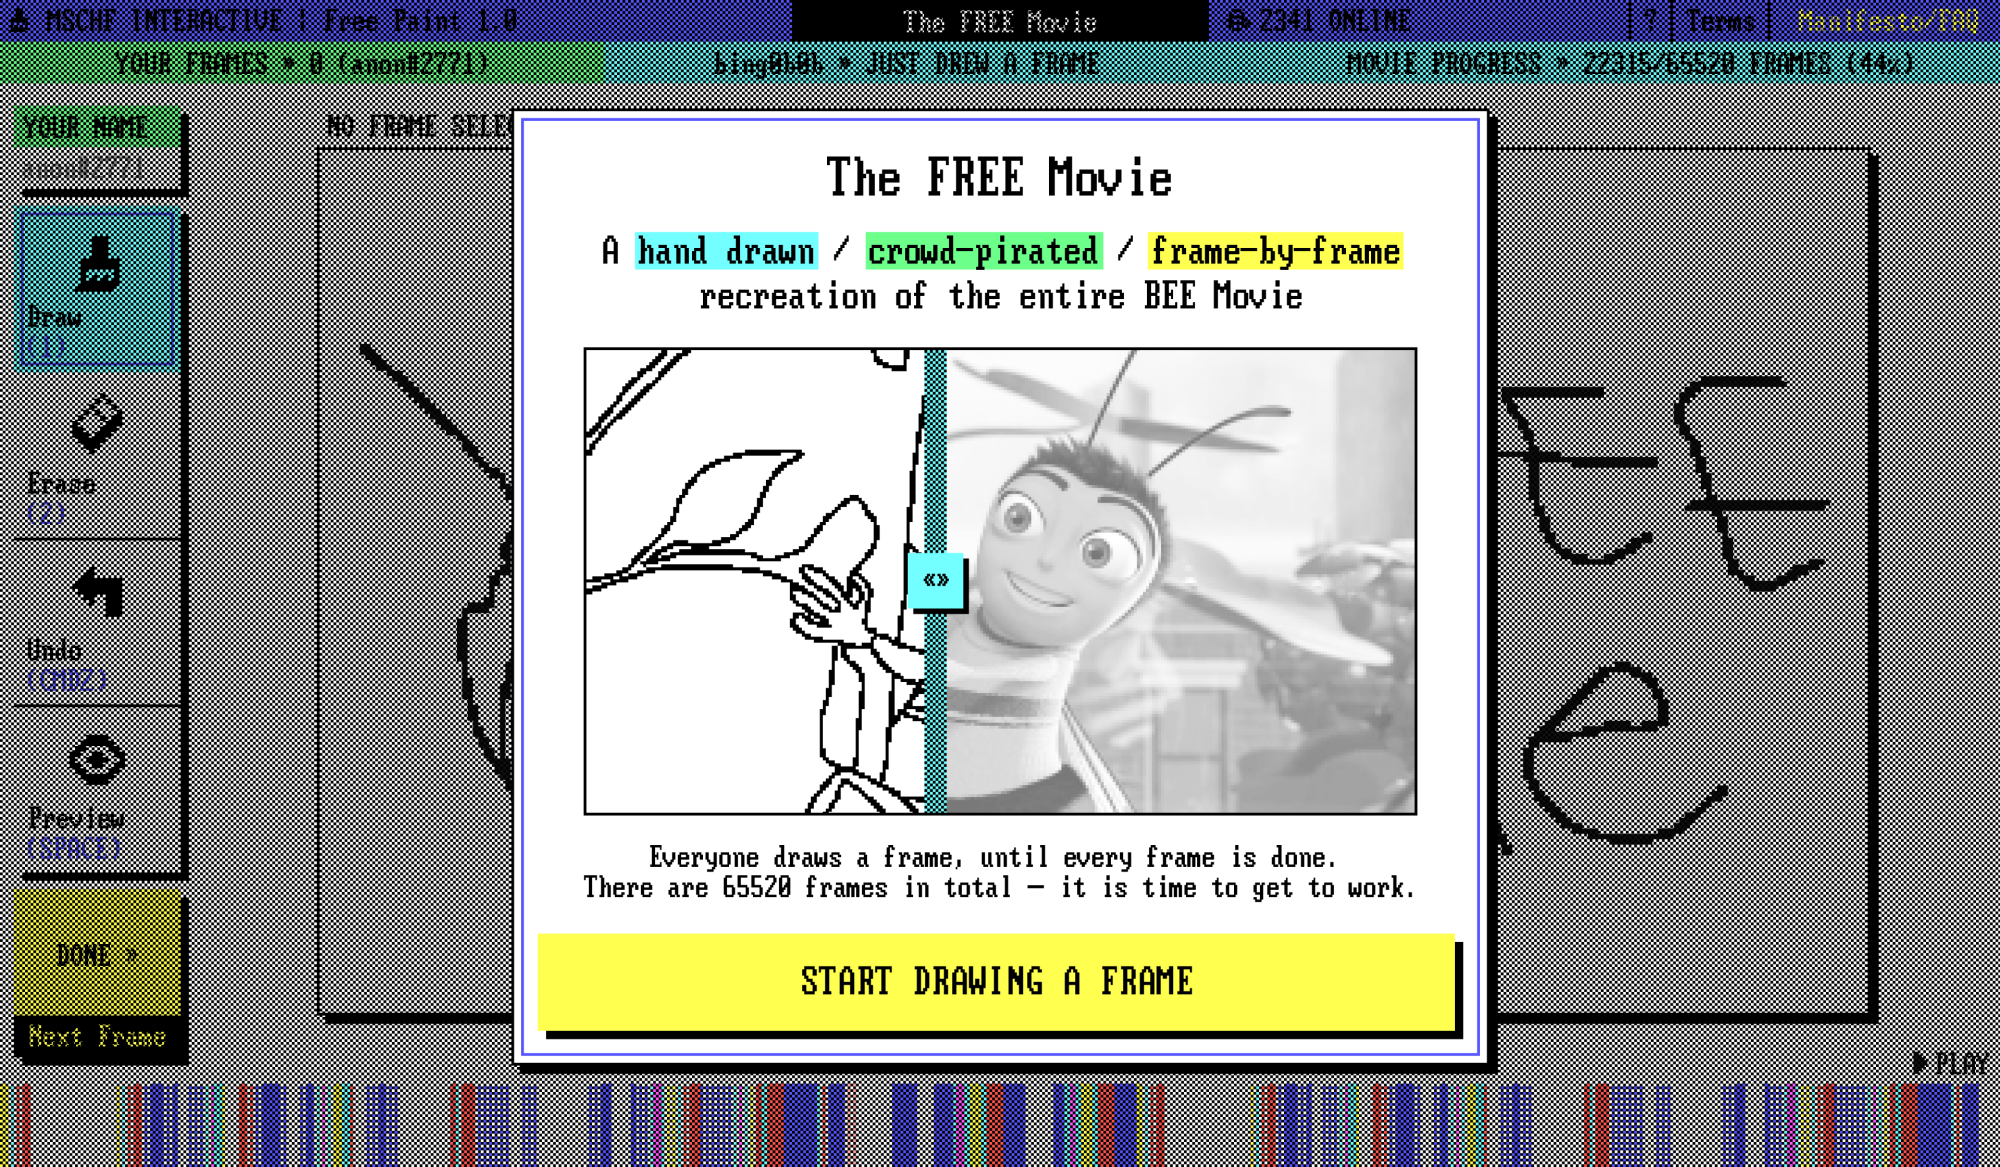 MSCHF 'The Free Movie' project showing a tracing of a movie frame